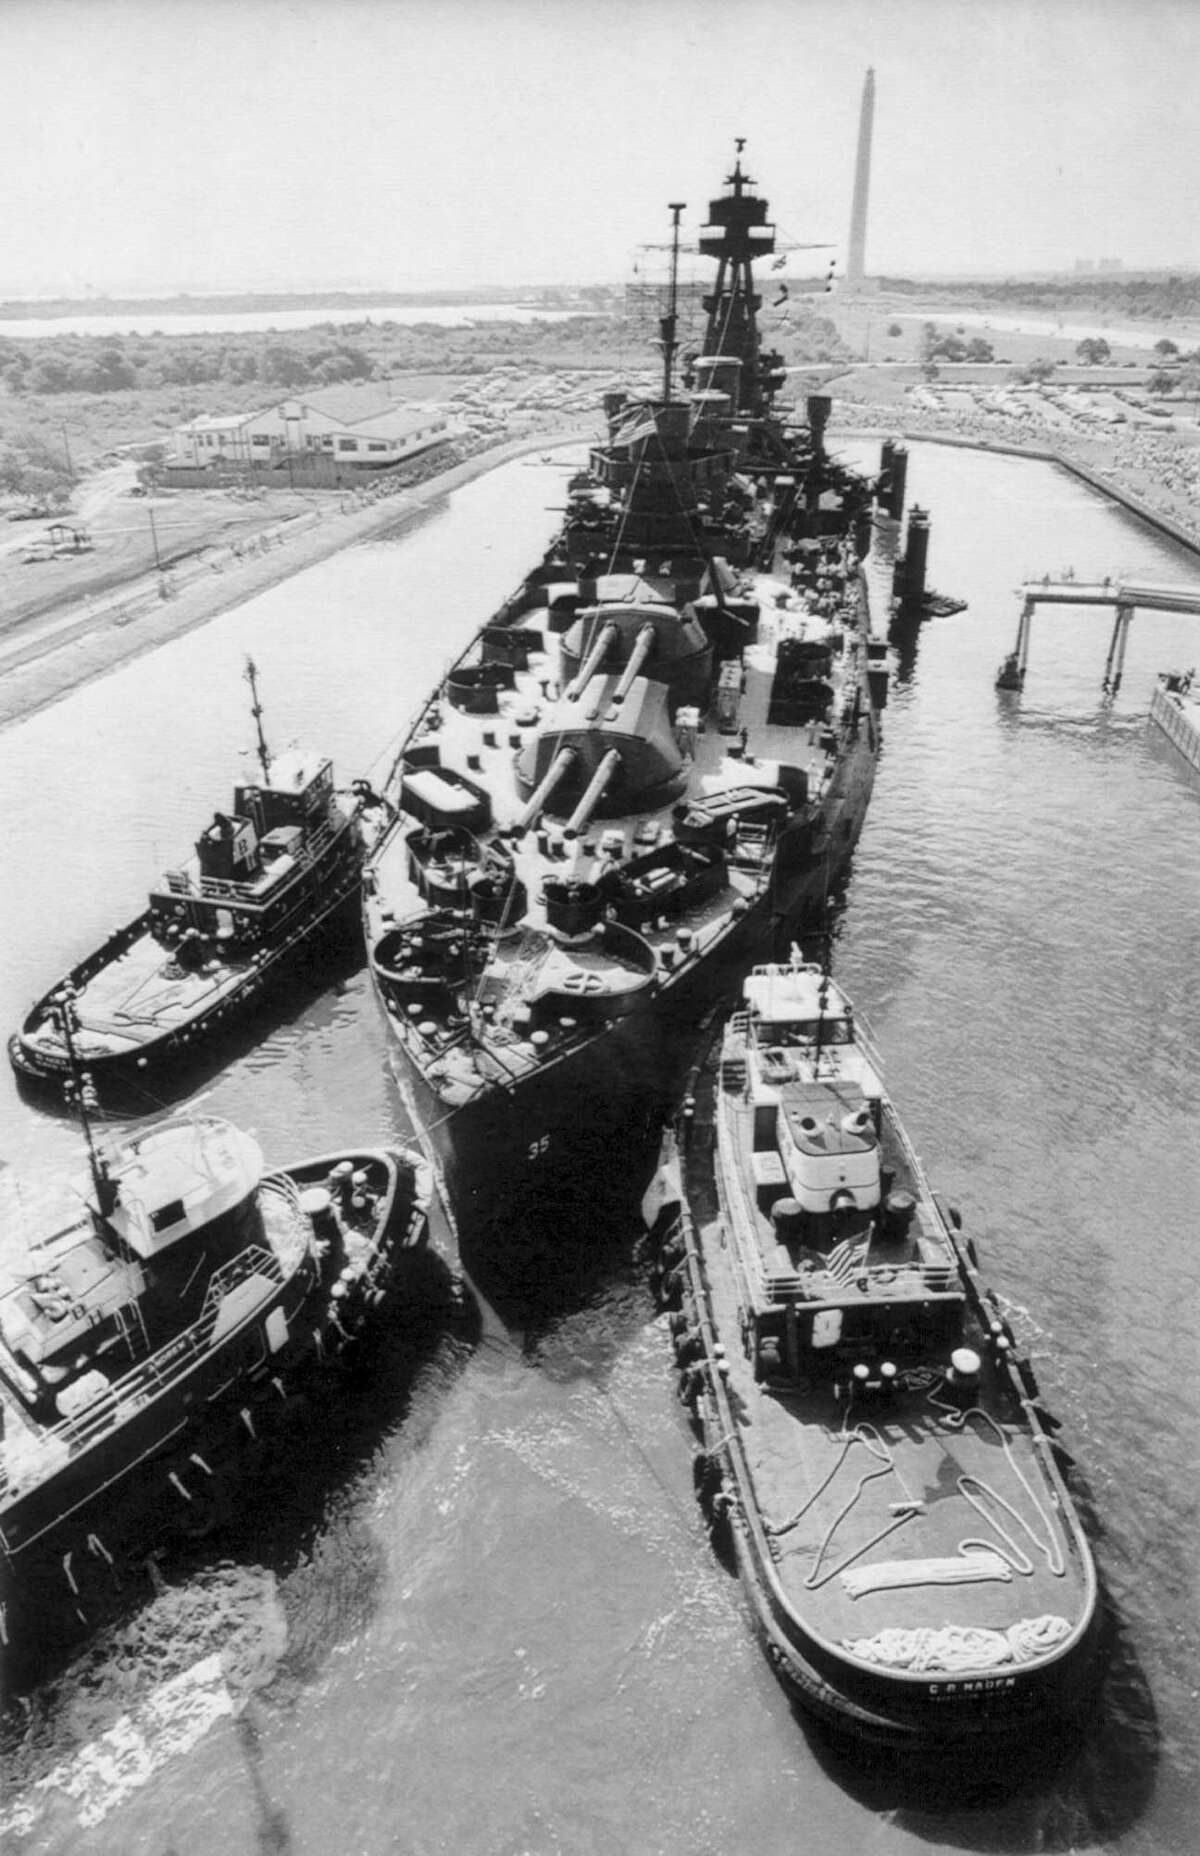 After its restoration, the USS Texas is returned to its permanent berth at the San Jacinto State Park near La Porte on July 26, 1990. Since then, the ship has deteriorated to the point where it can no longer be towed or moved.